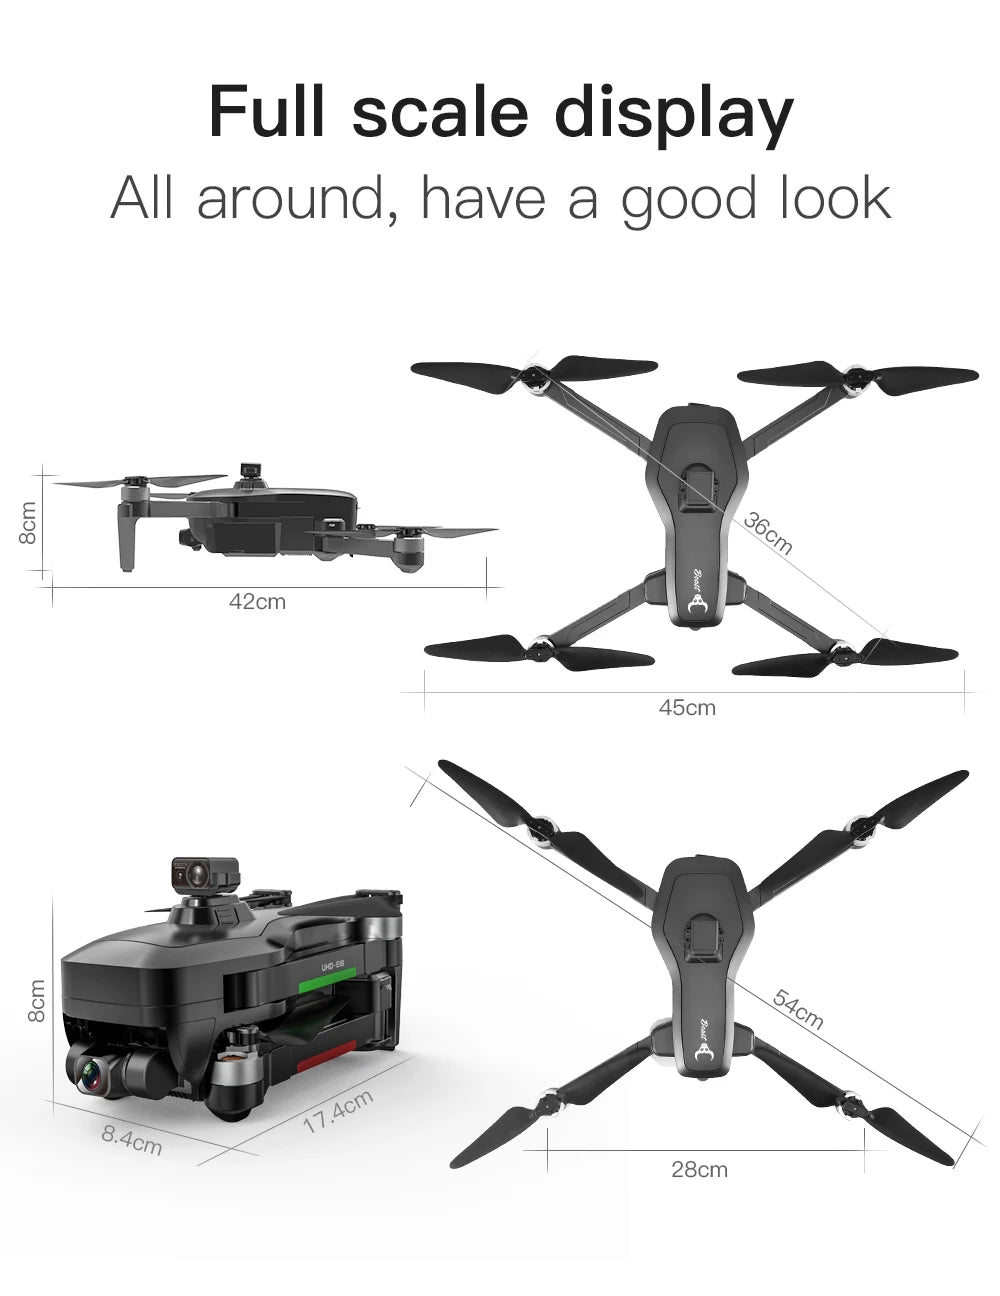 HGIYI SG906 MAX2  Drone, if an obstacle is detected within 20 meters, the remote control will issue an alarm .